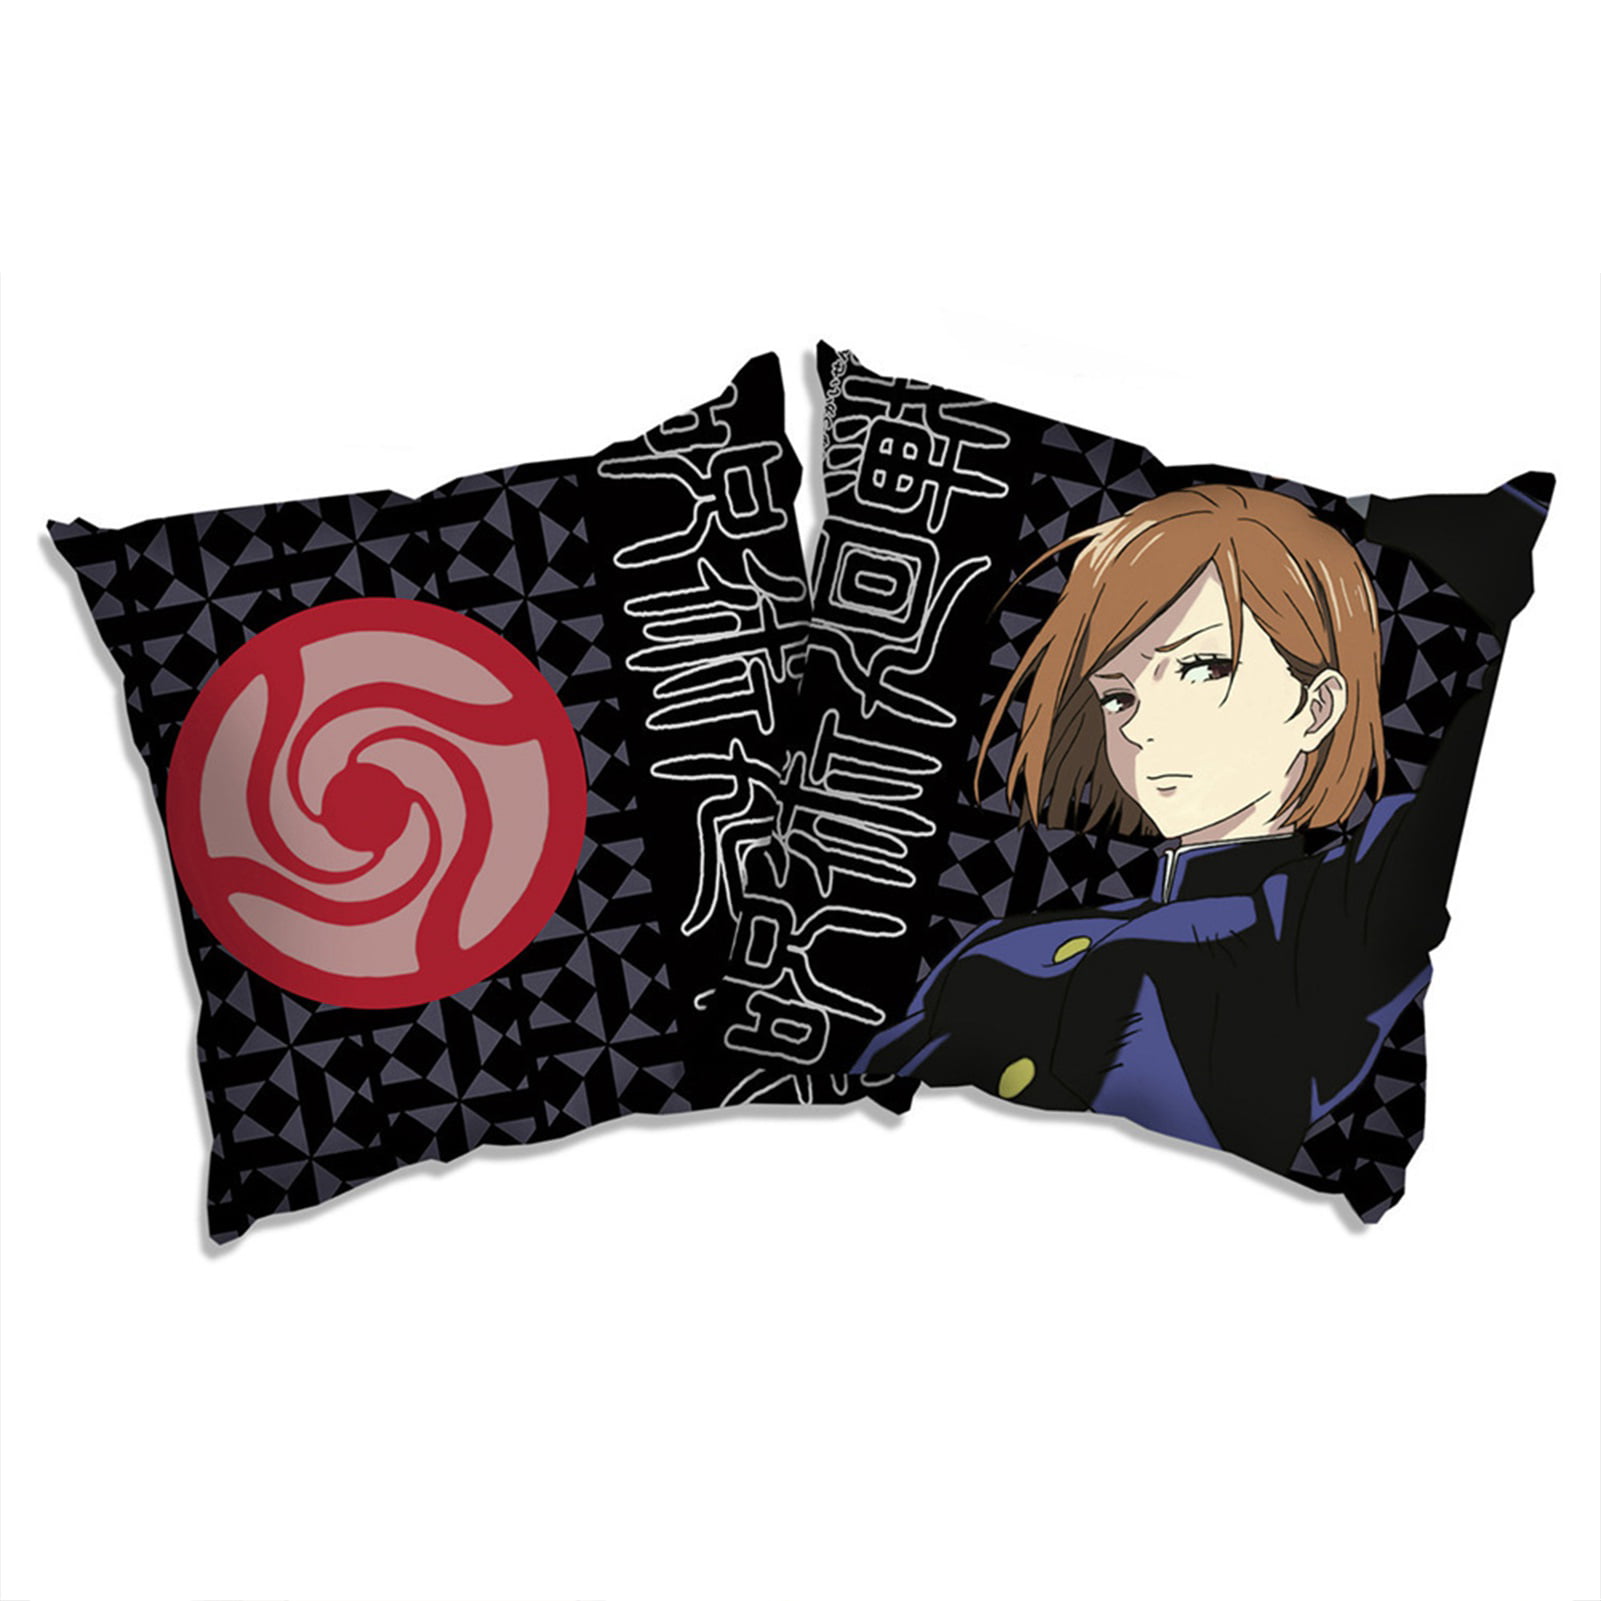 D Gray man Anime Manga two sides Pillow Cushion Case Cover 797 A